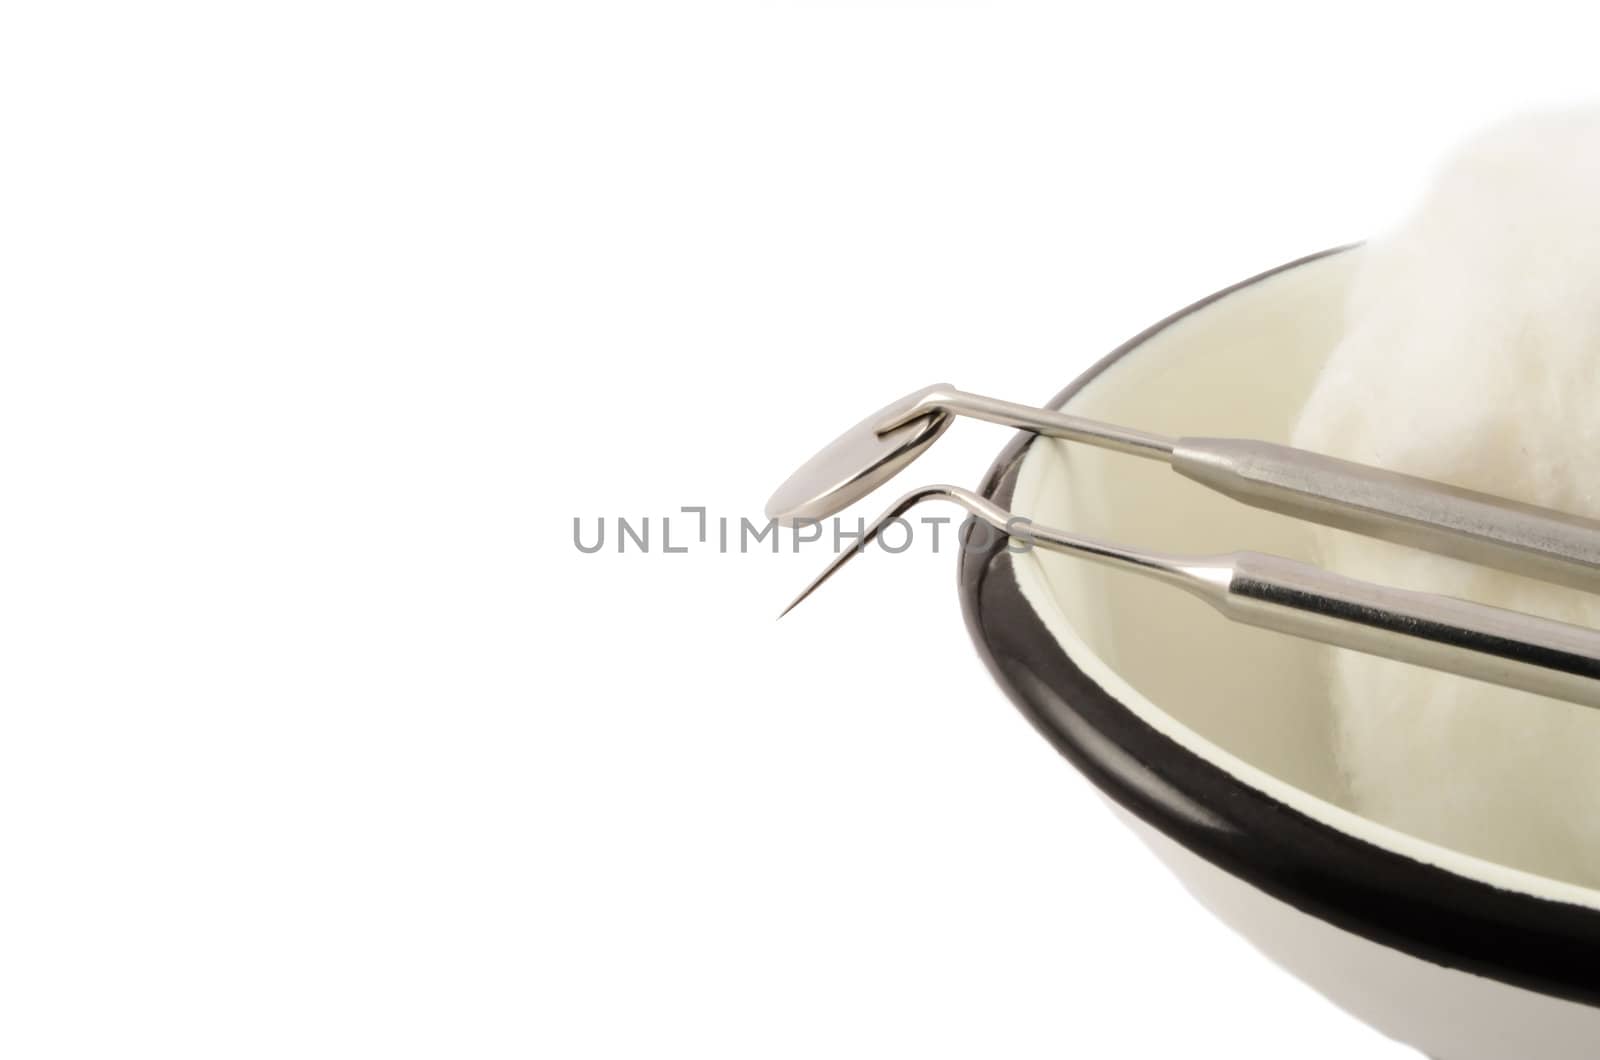 Medical dental instruments on a metal tray on a white background